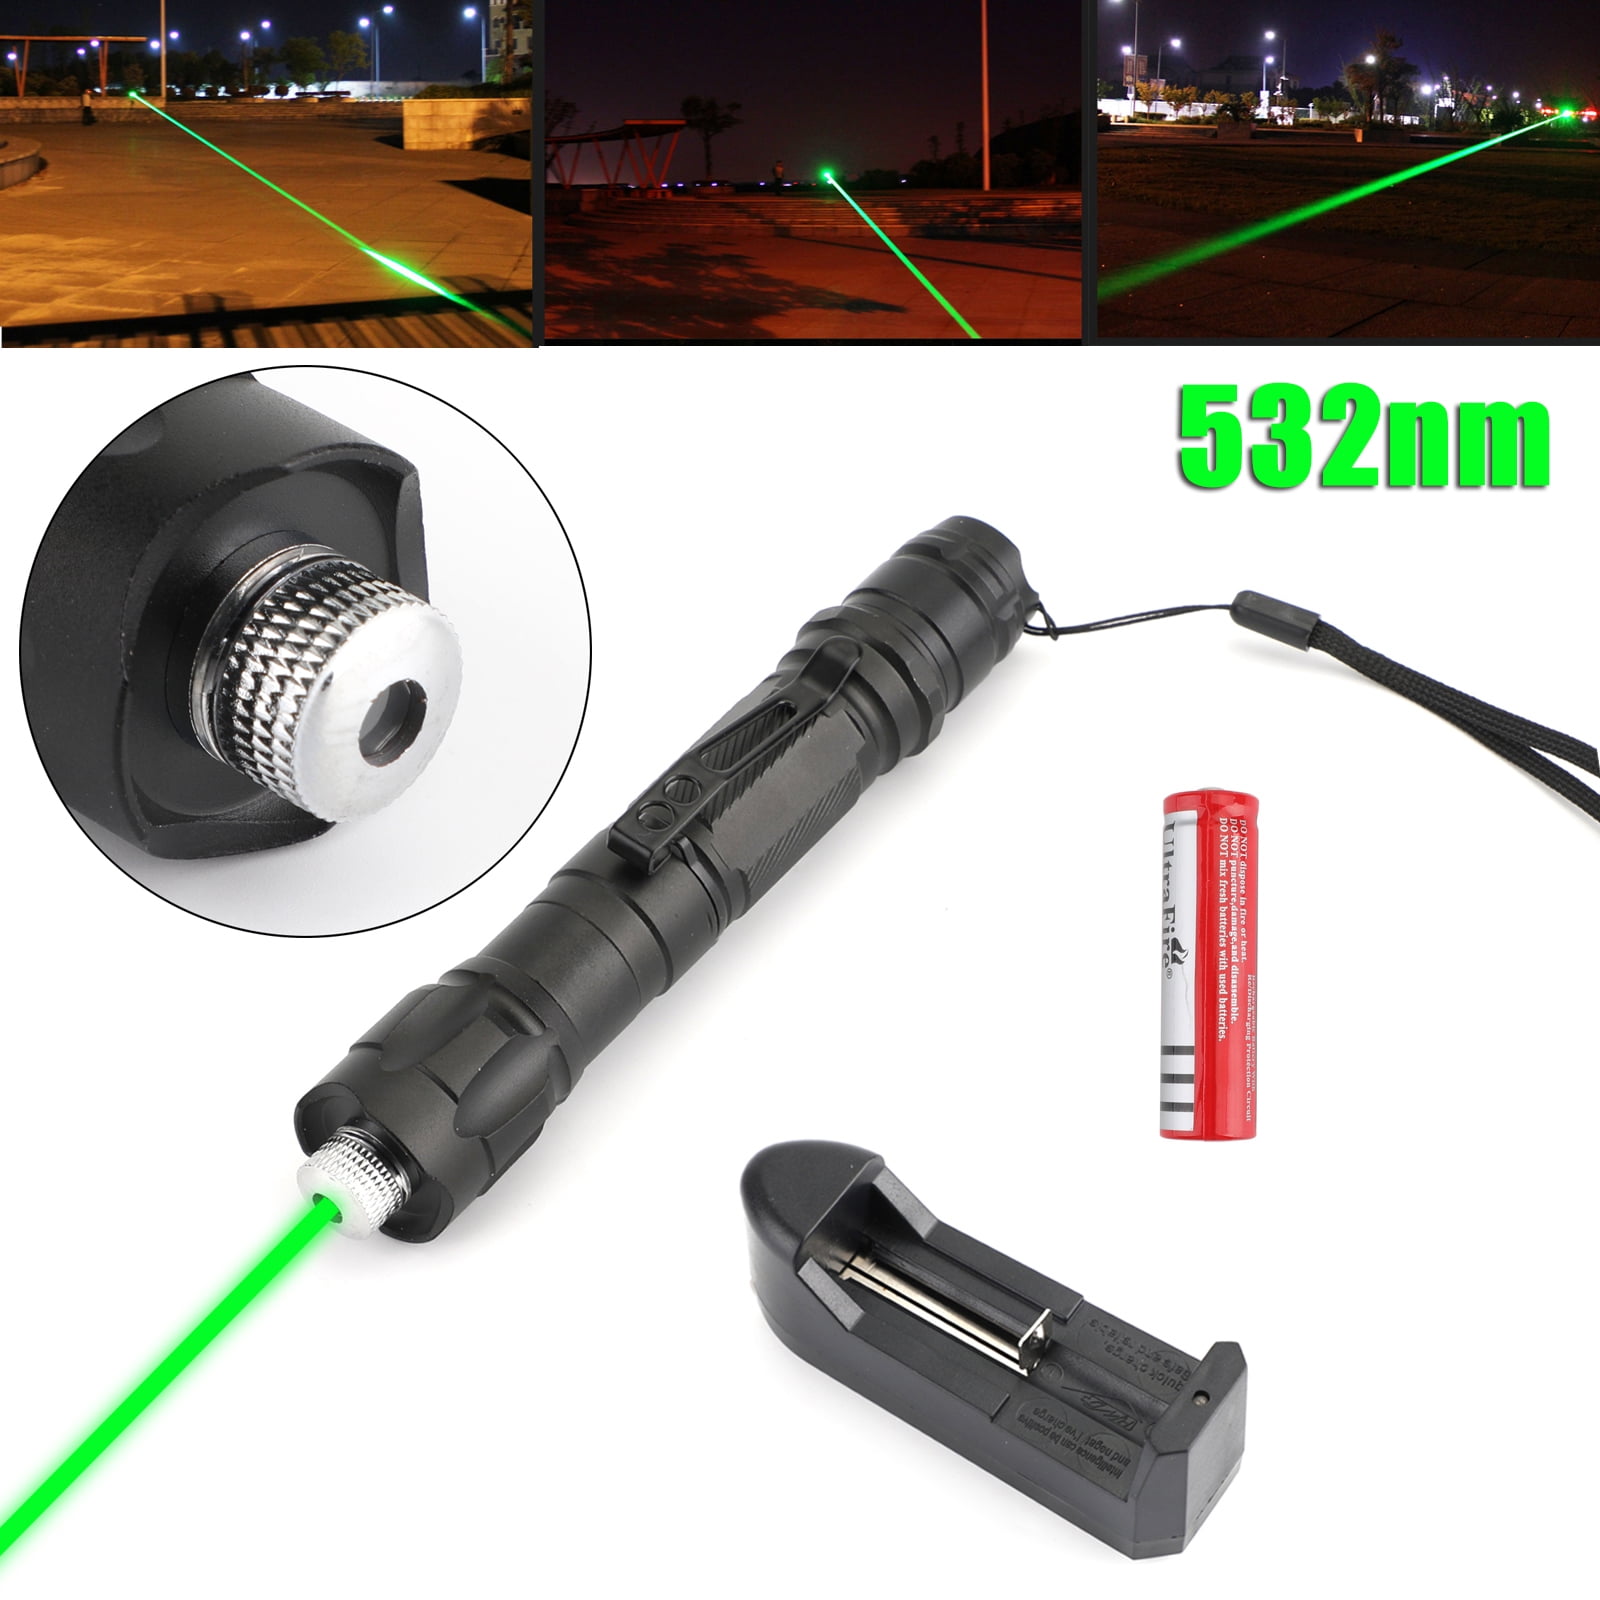 Details about   Professional High Quality Green Laser Pointer lazer Visible Beam Battery Charger 